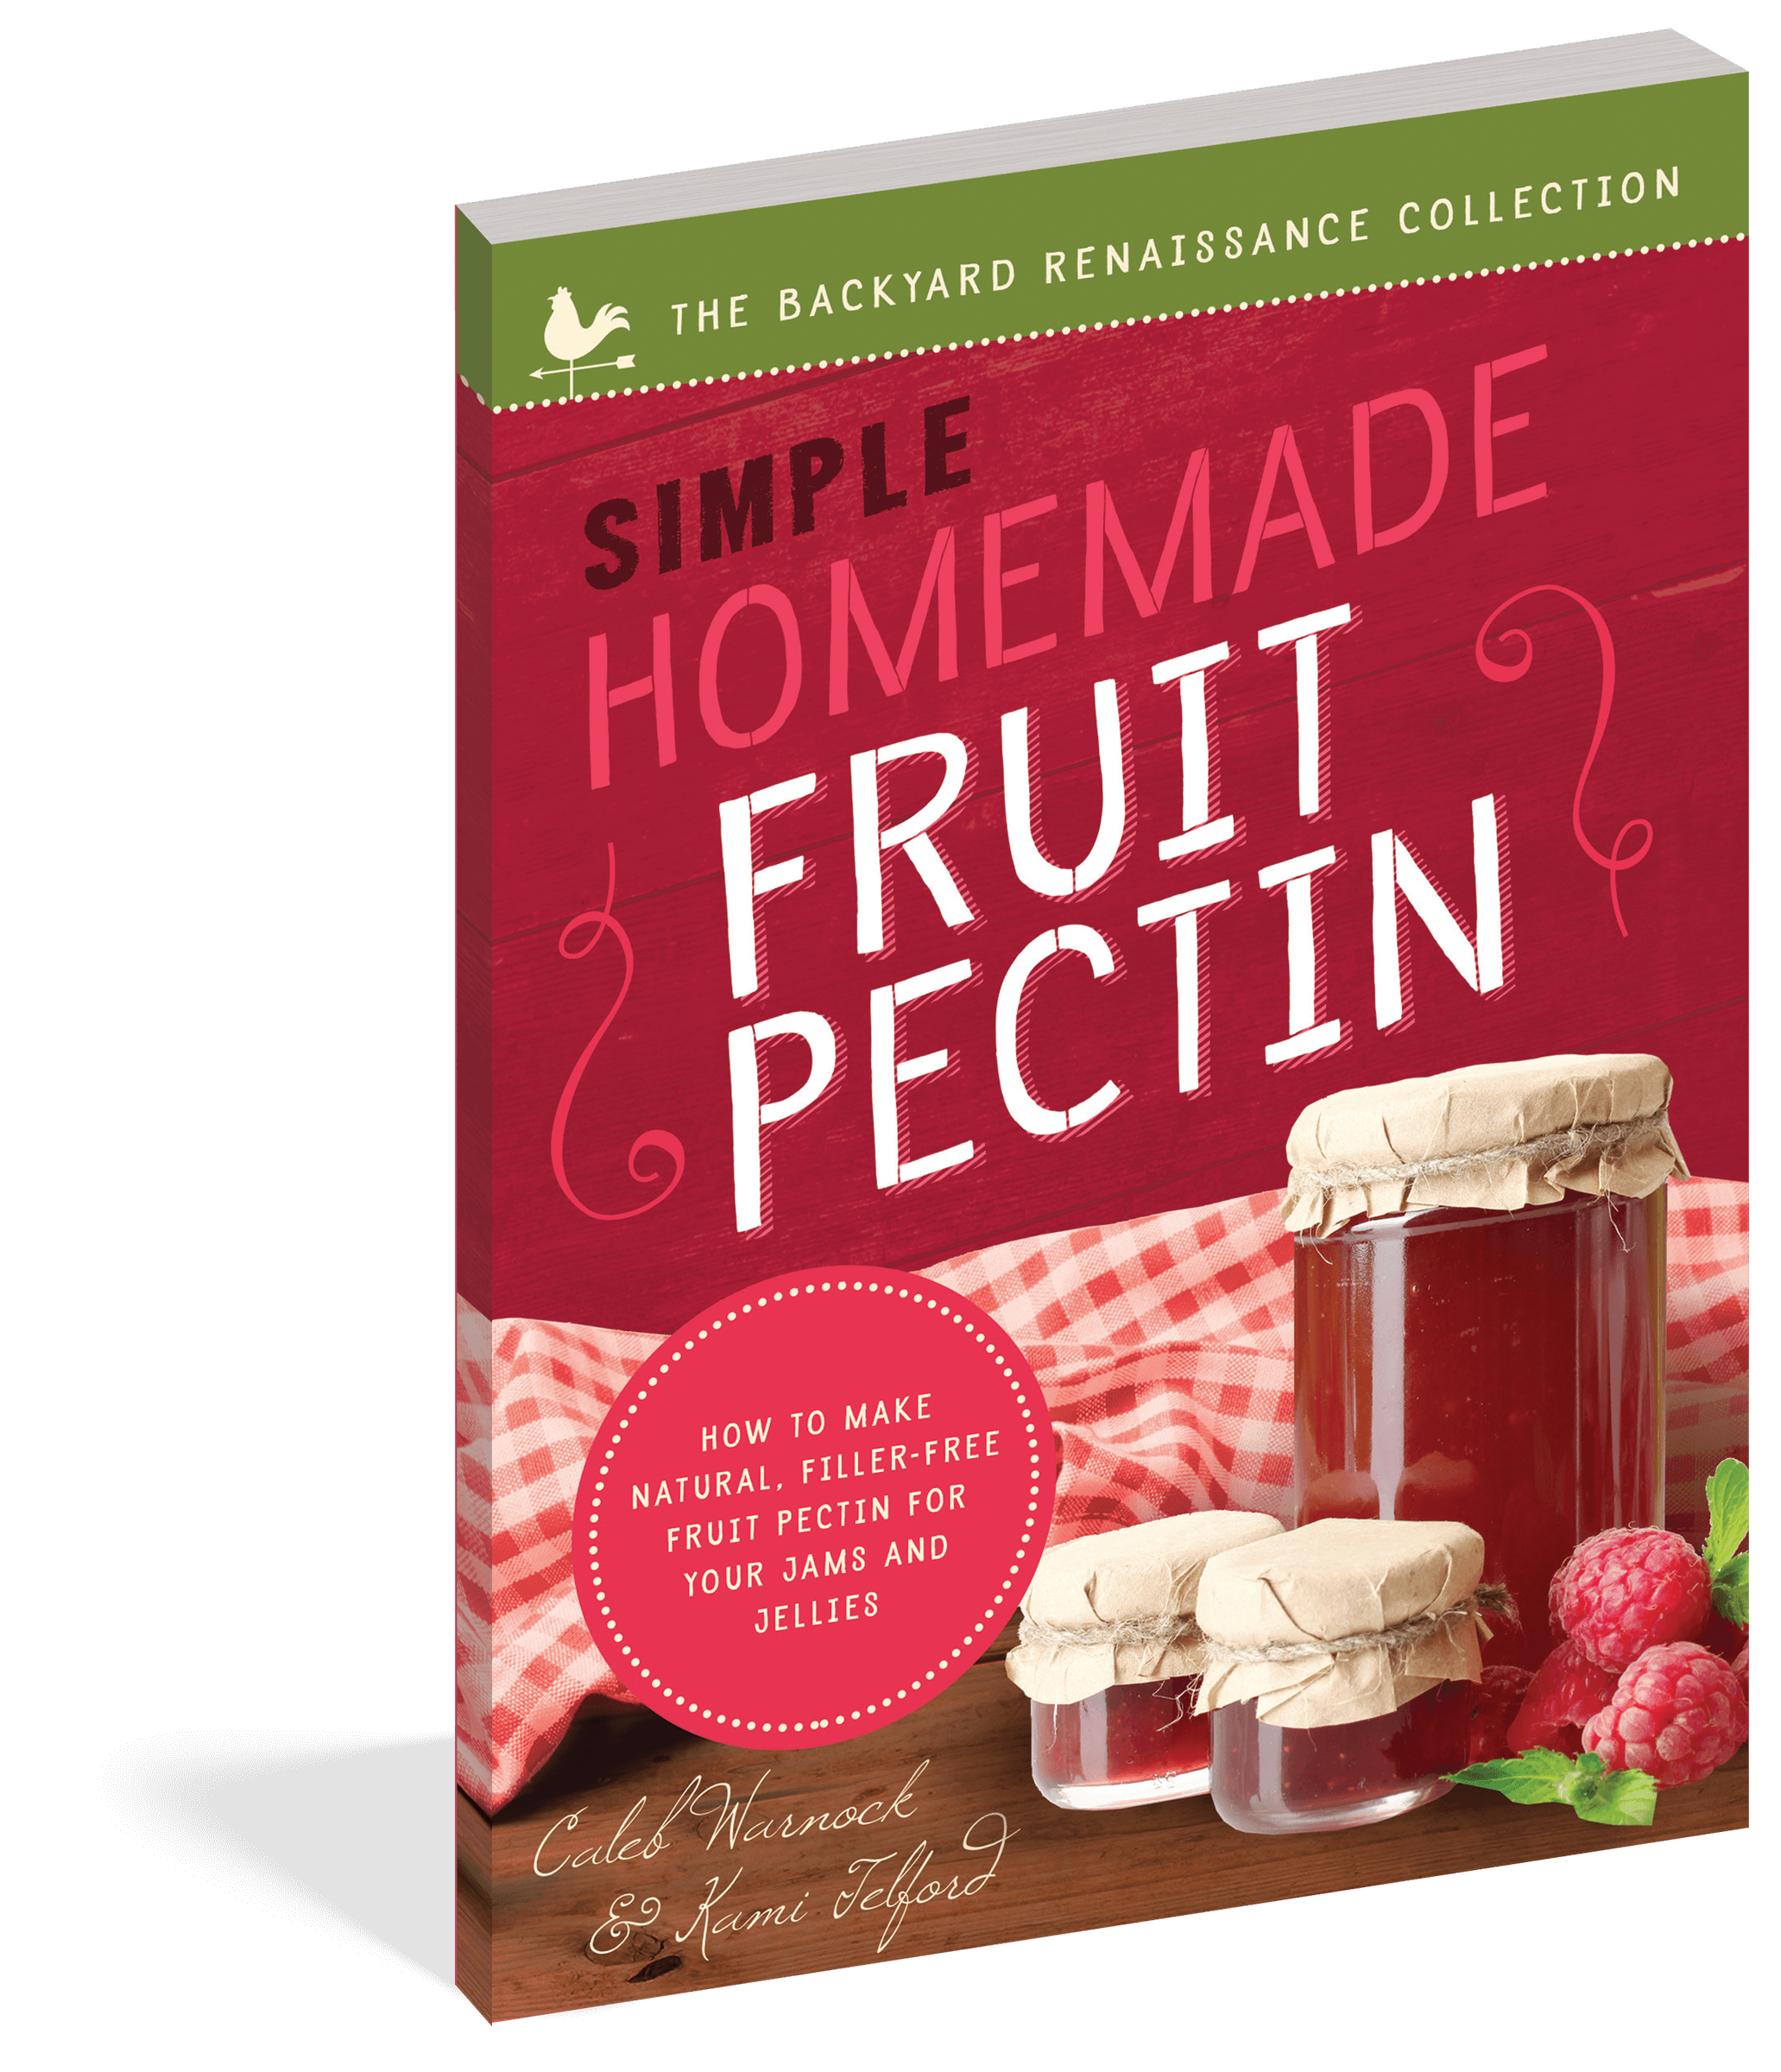 The cover of the book Simple Homemade Fruit Pectin.